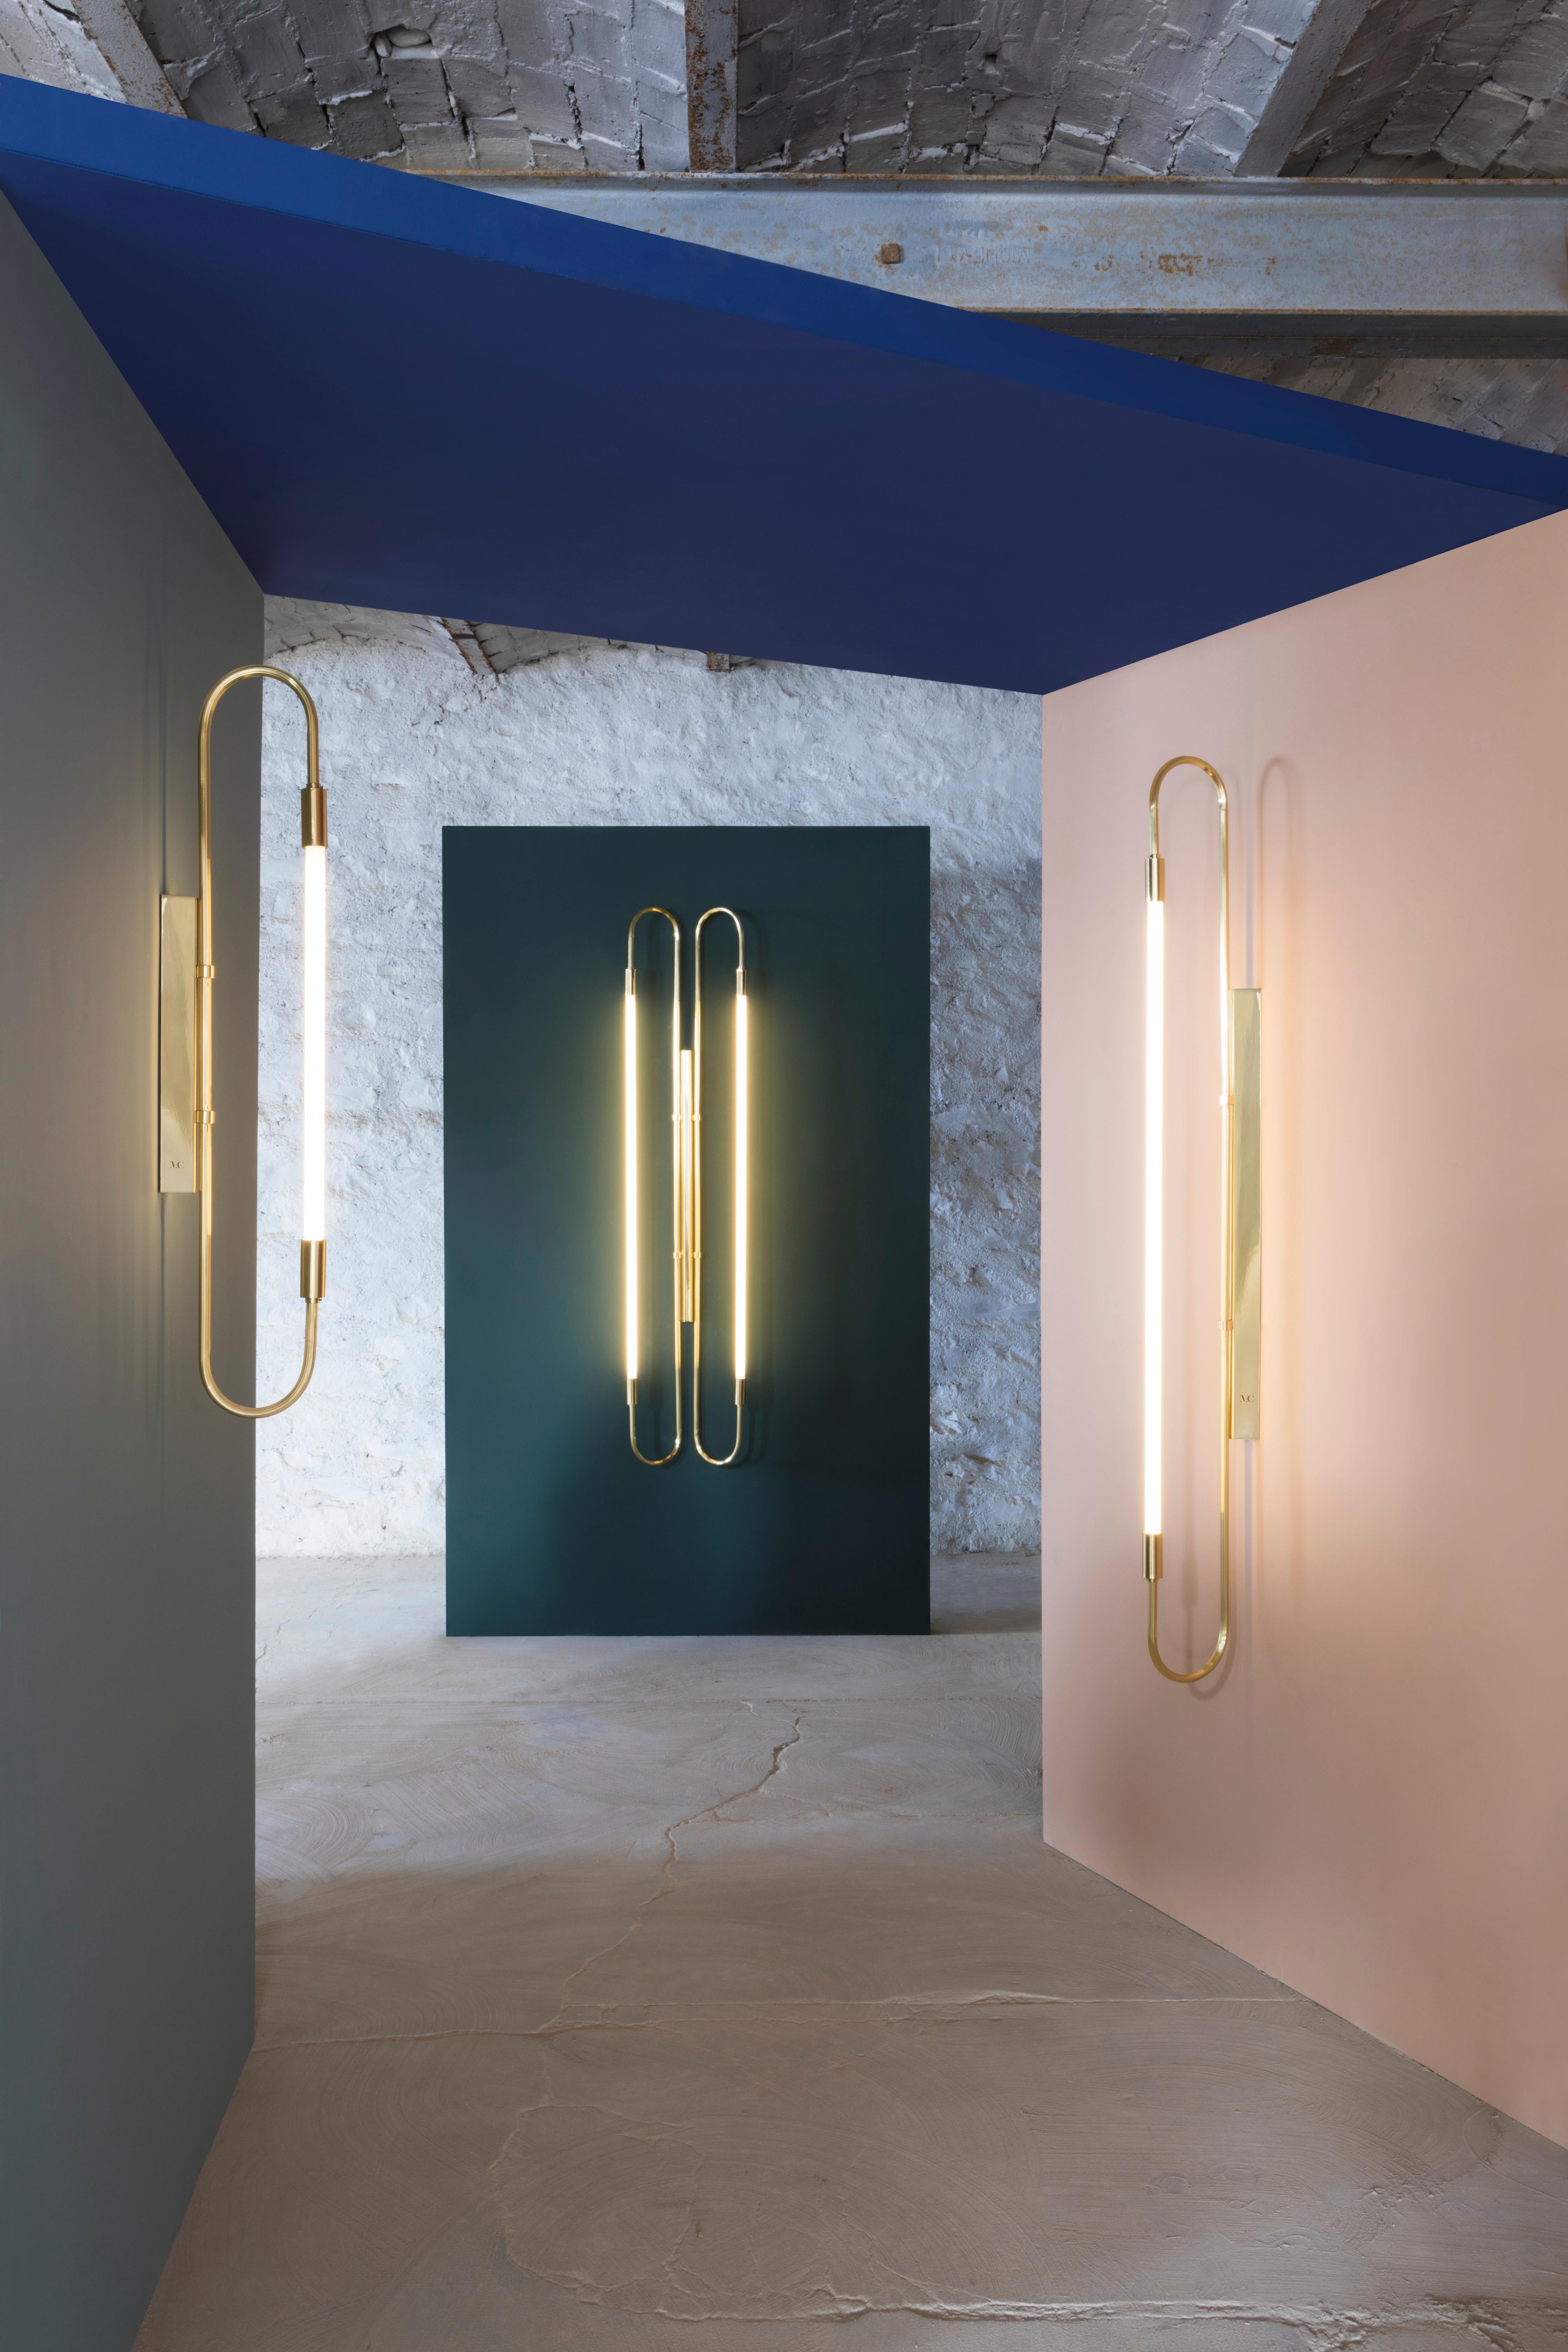 Nickel wall lamp neon double 170 by Magic Circus Editions
Dimensions: H. 170 cm, W. 37 cm, D. 11 cm, 3.6 kg.
Materials: fluted brass tube and glass.
Available finishes: brass (lacquered polished brass, unlacquered polished brass, brushed brass)